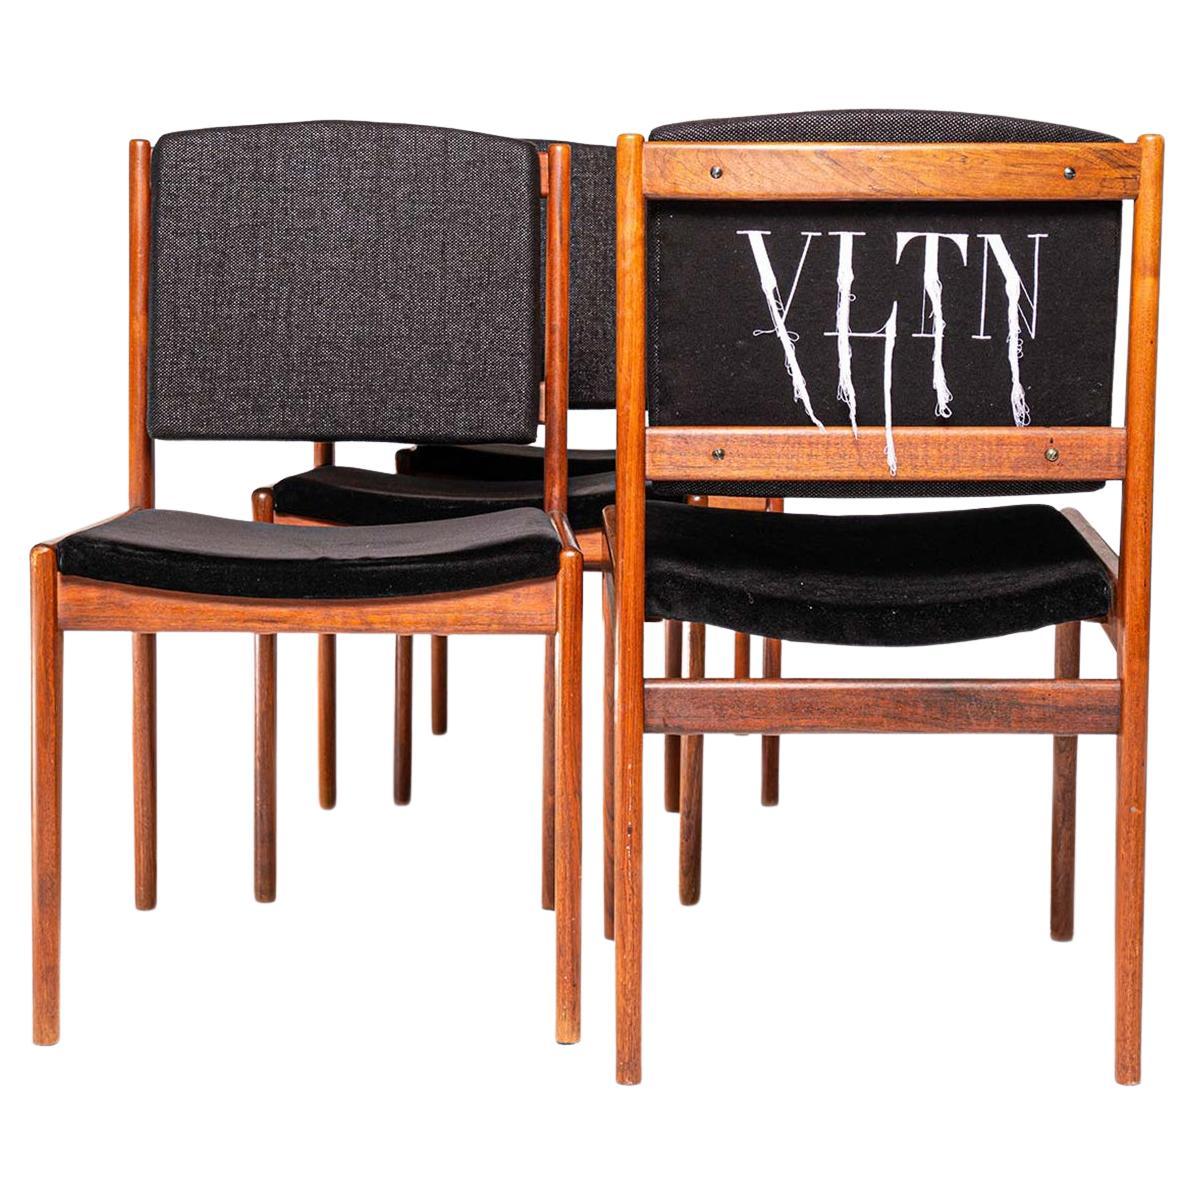 Swedish Classic Chairs from the 60s Remodeled in the Intersection of Fashion For Sale